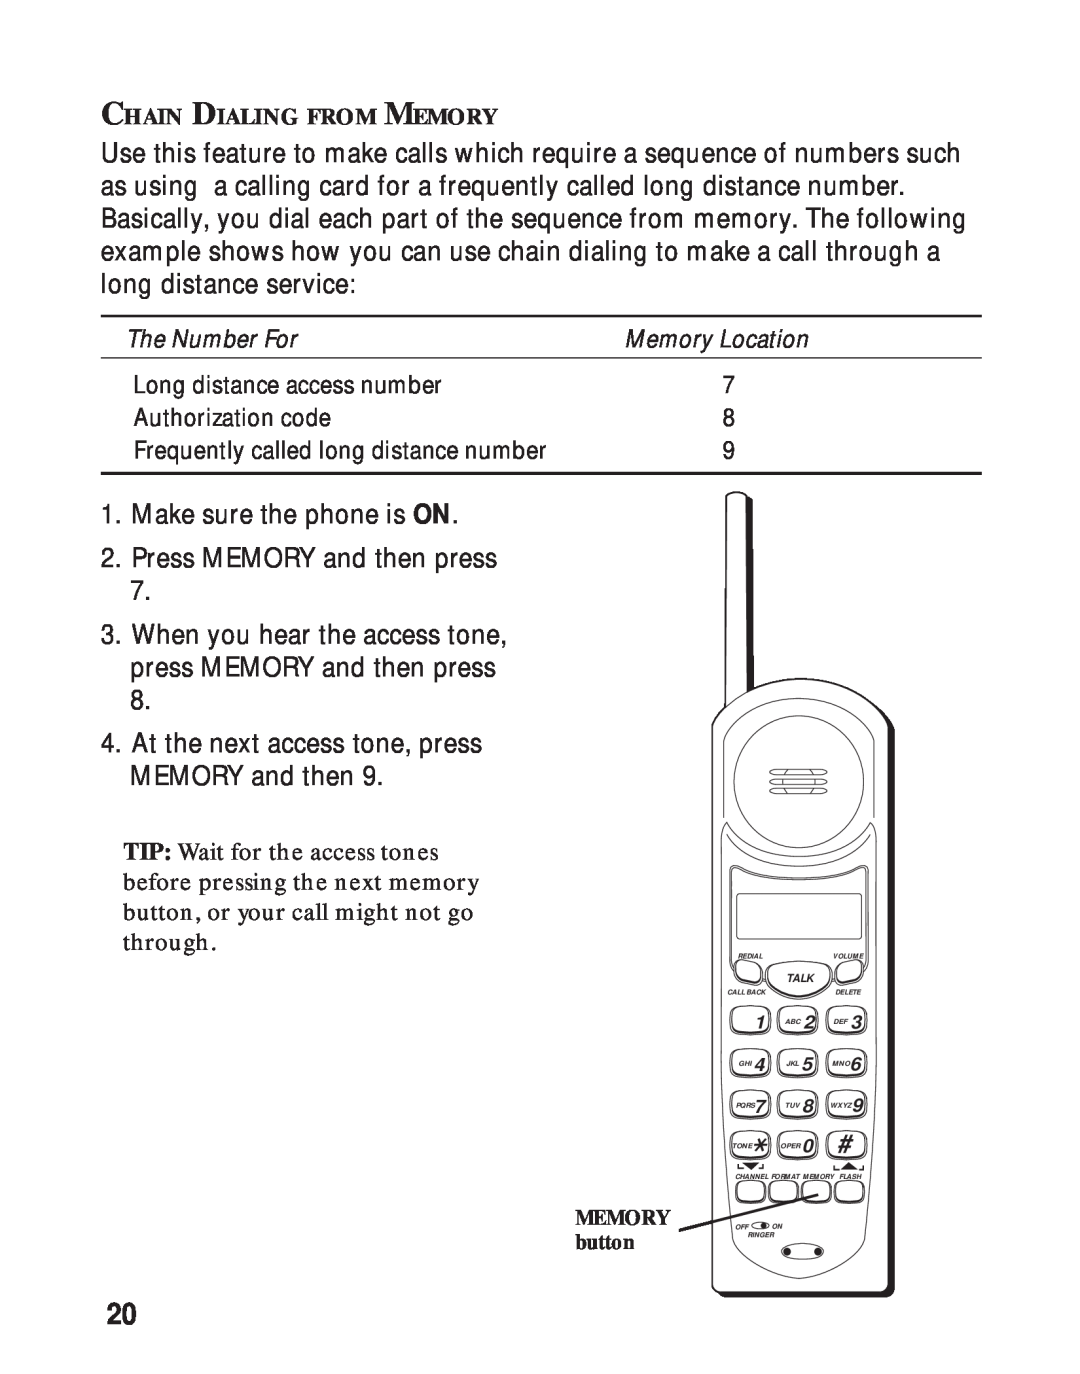 RCA 26730 manual Make sure the phone is ON 2. Press MEMORY and then press 